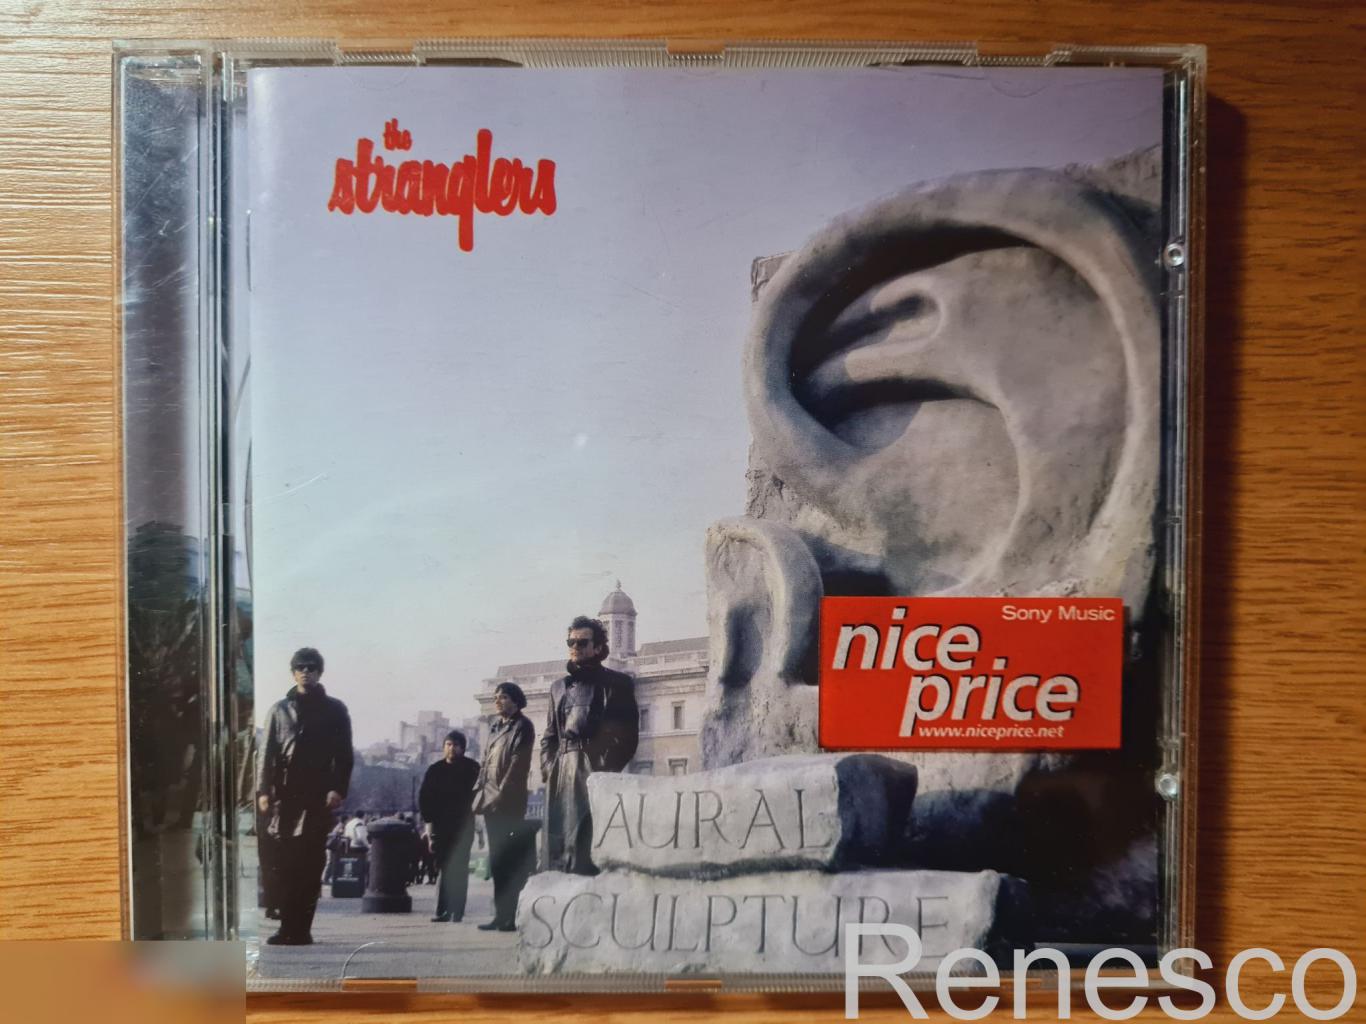 The Stranglers ?– Aural Sculpture (Europe) (2001) (Reissue) (Remastered)